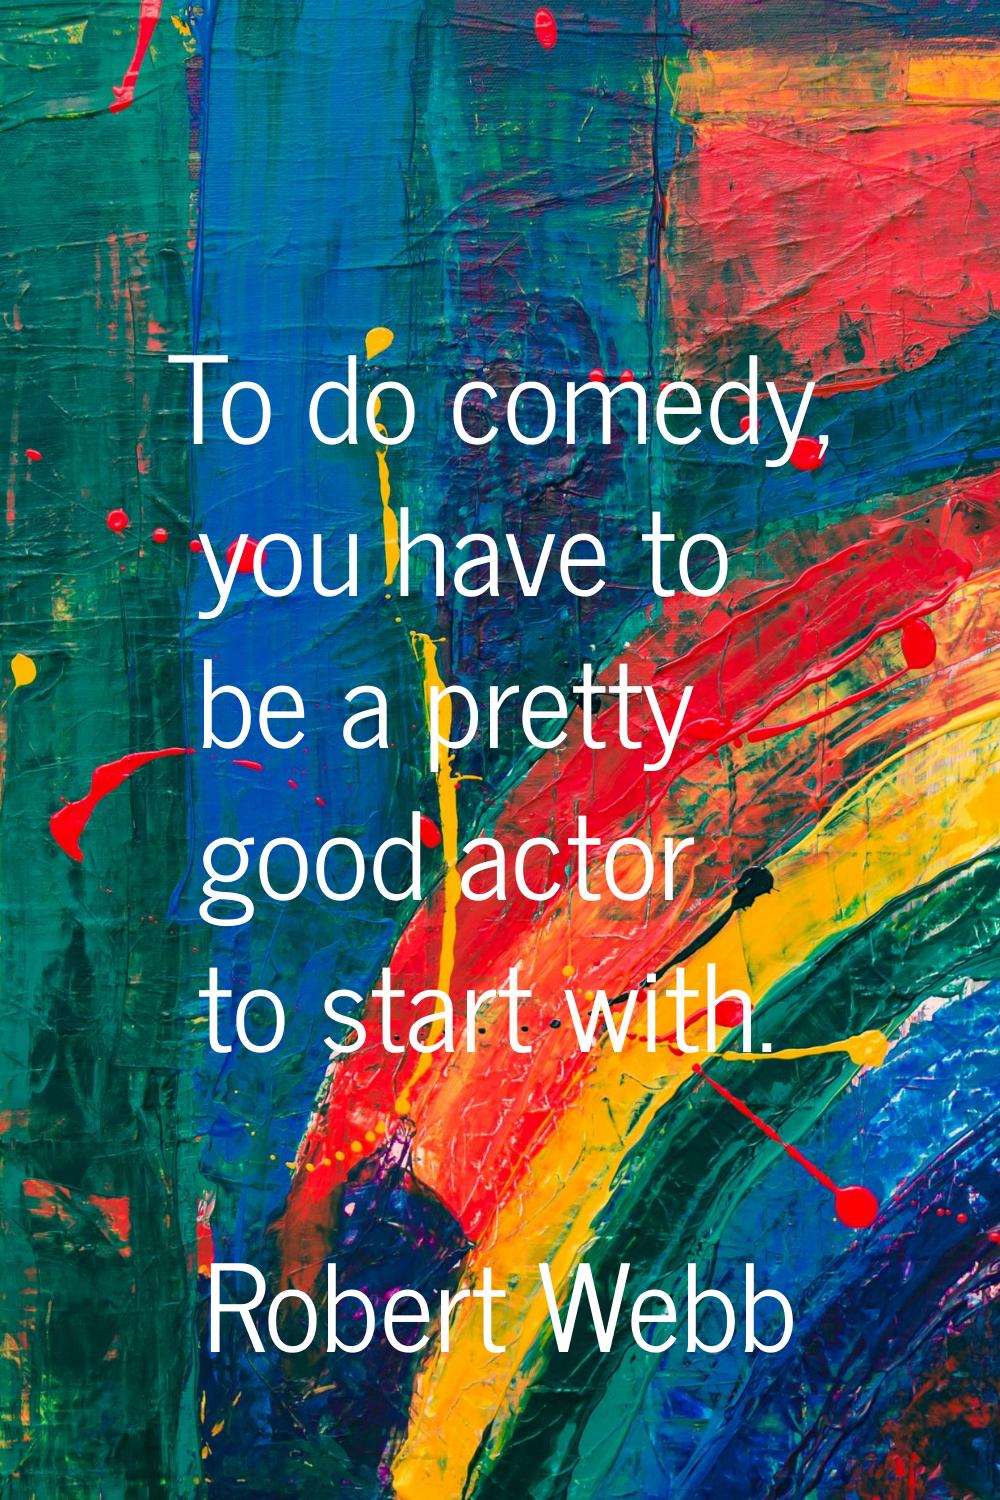 To do comedy, you have to be a pretty good actor to start with.